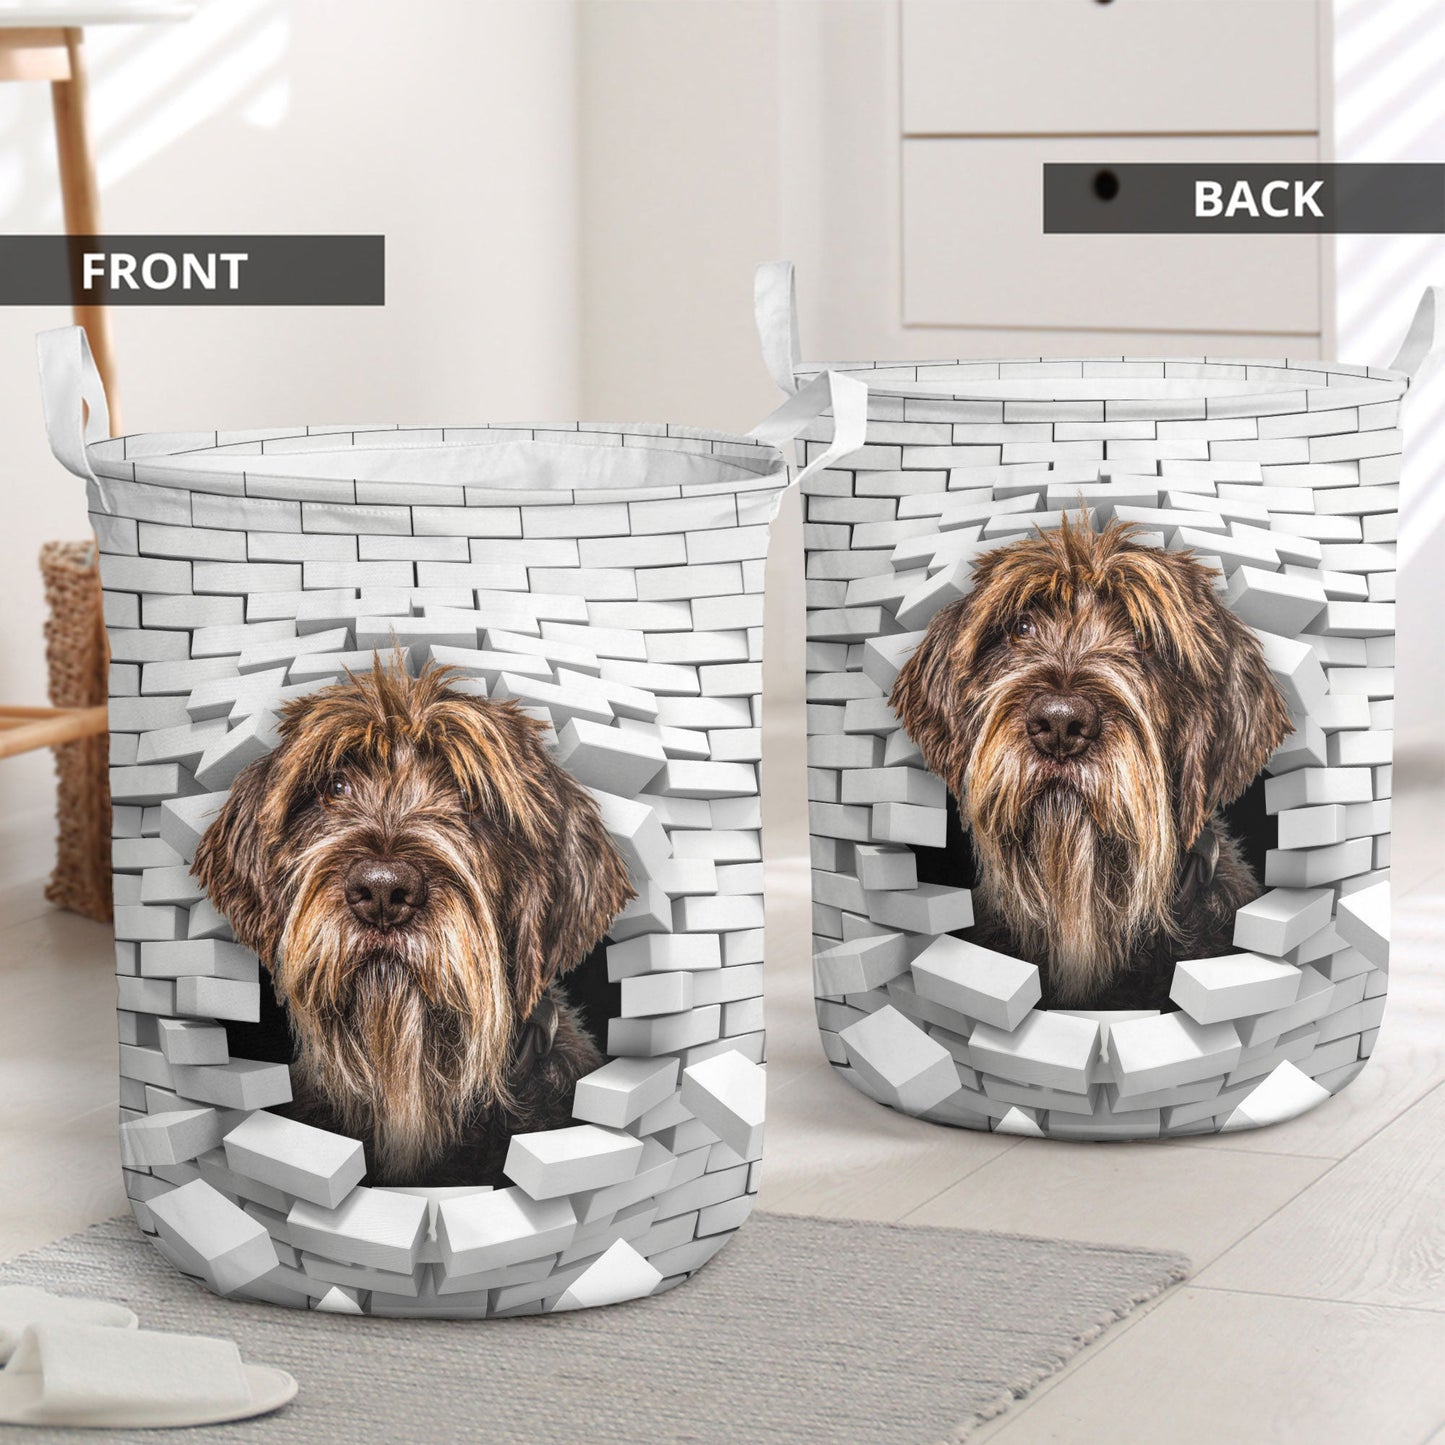 Wirehaired Pointing Griffon - In The Hole Of Wall Pattern Laundry Basket